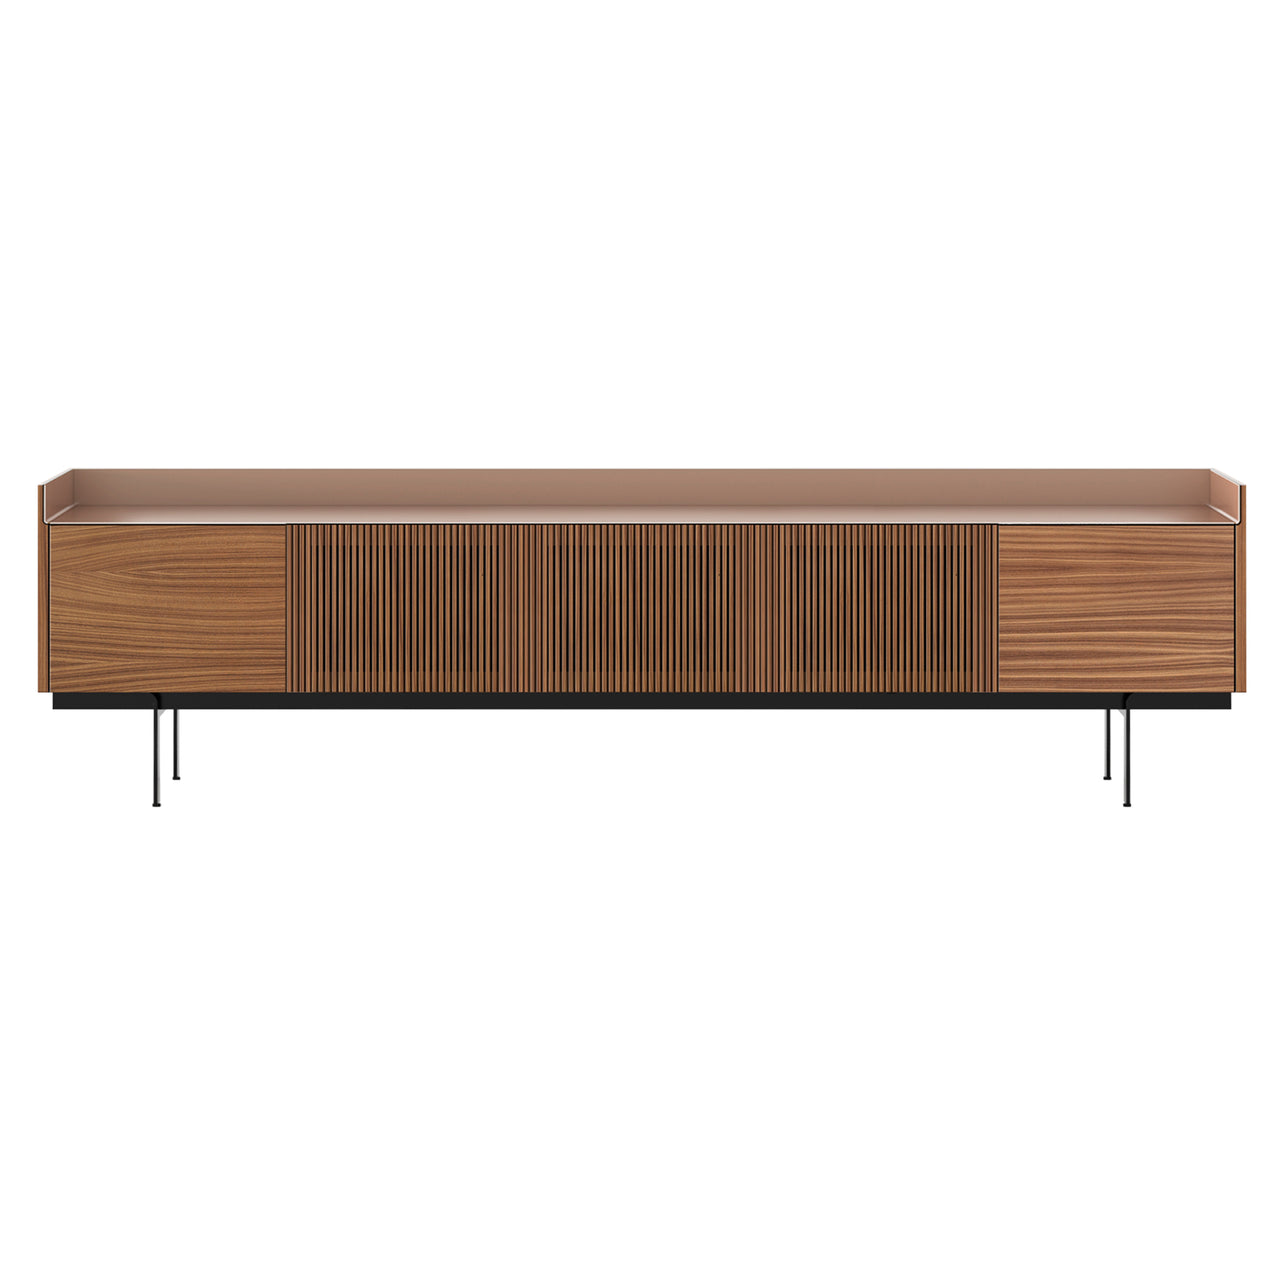 Stockholm Technic Sideboard: STH504 + Walnut Stained Walnut + Anodized Aluminum Pale Rose + Black